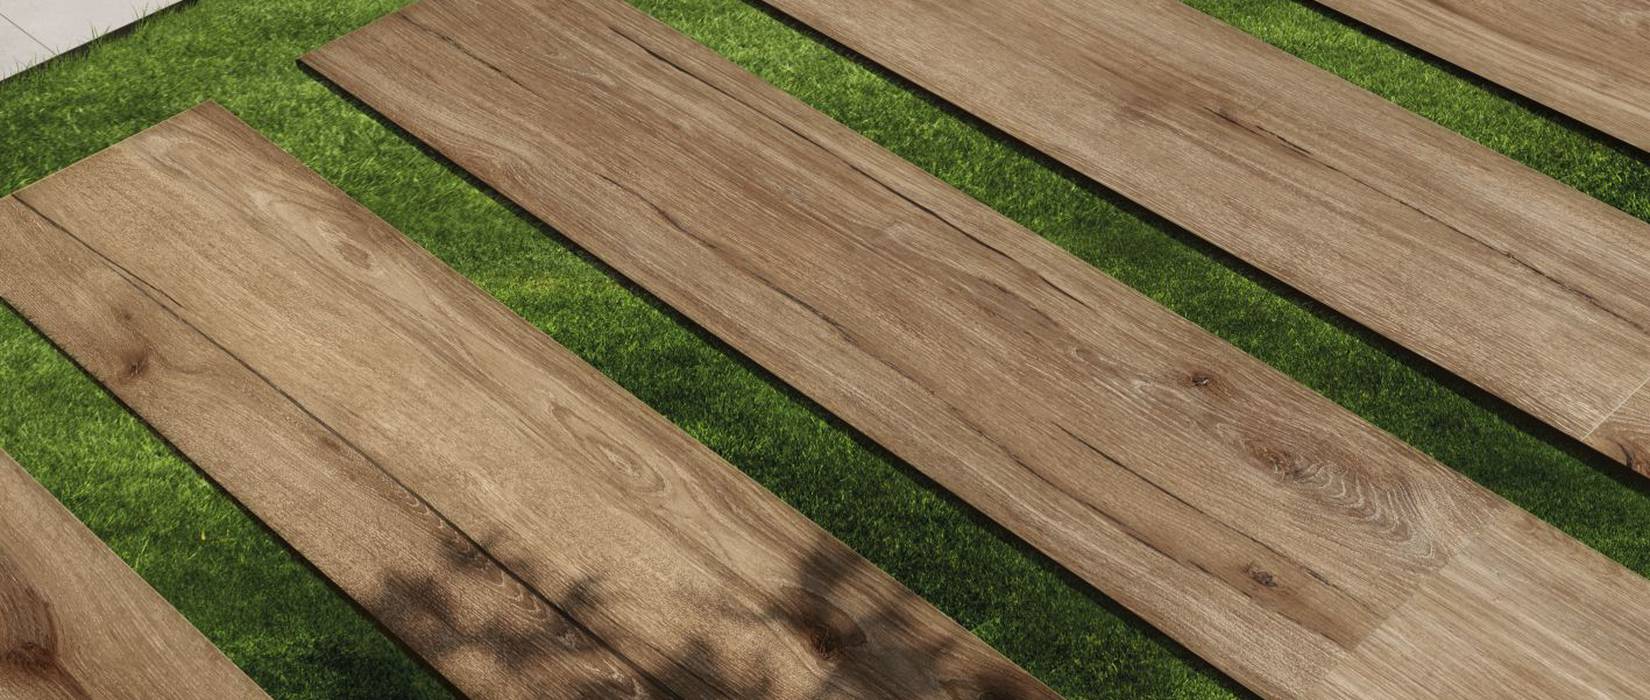 Thick wood effect planks for outdoors